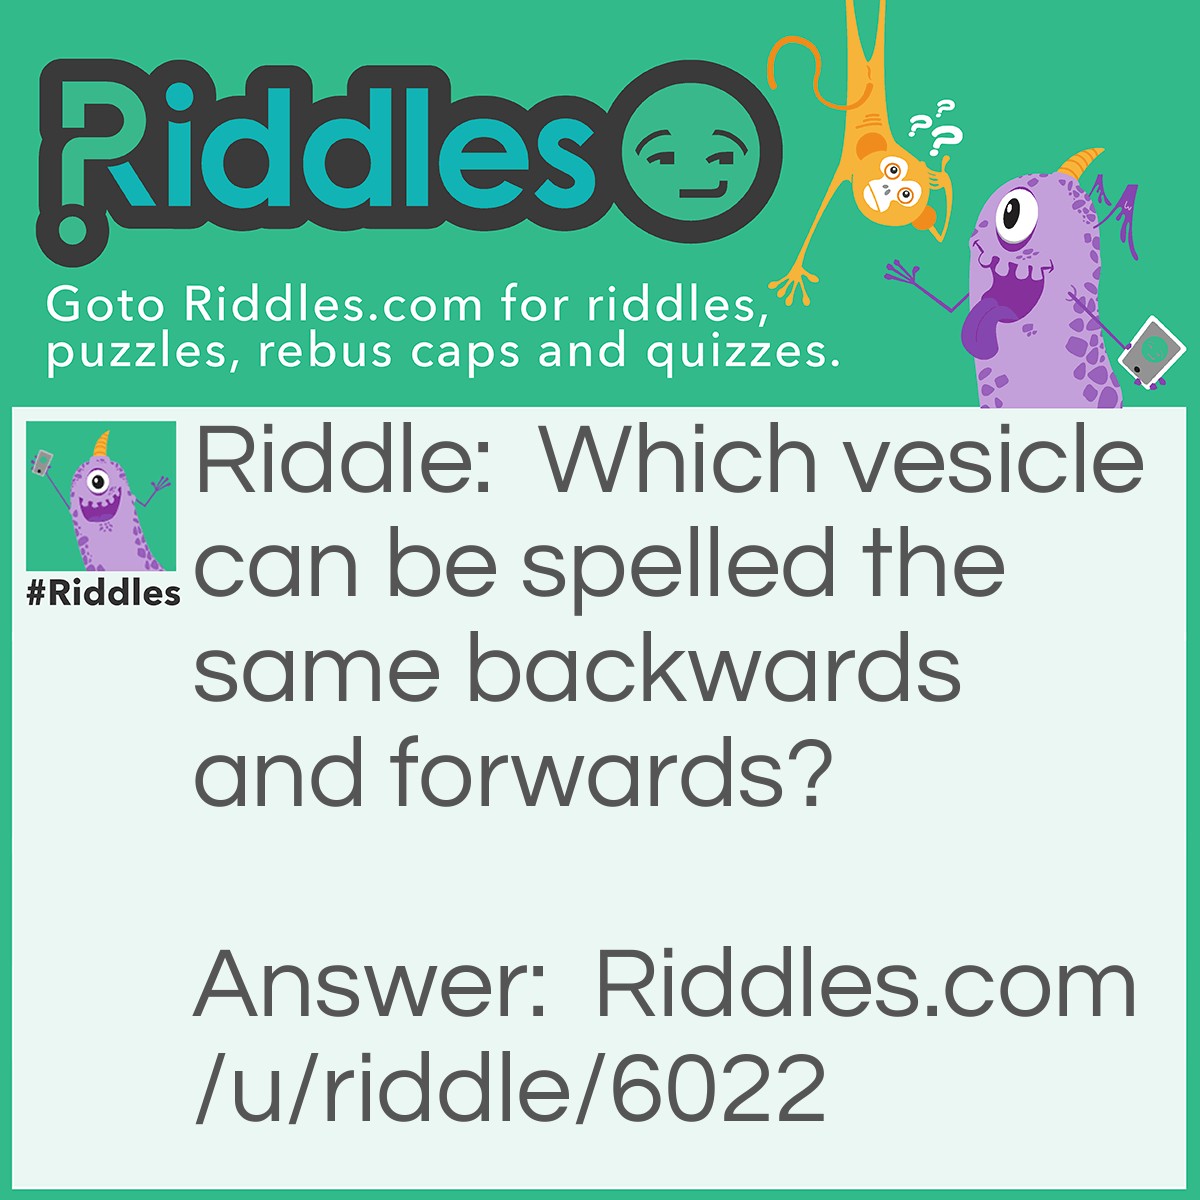 Riddle: Which vehicle can be spelled the same backwards and forwards? Answer: Racecar.